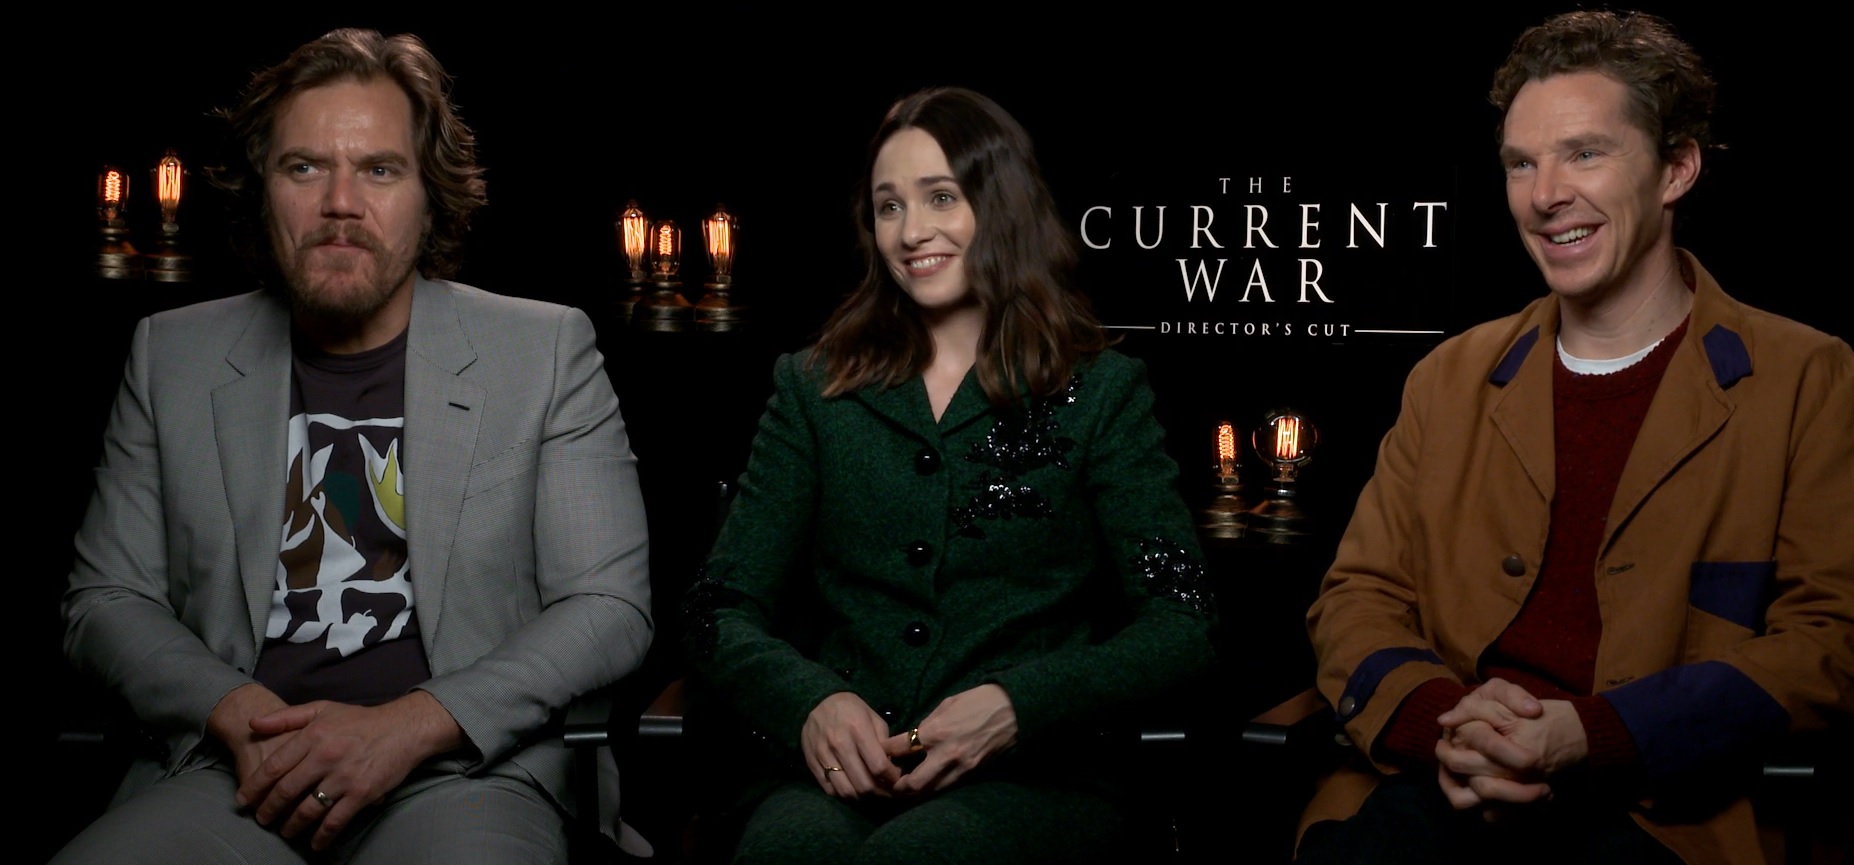 The Current War: Michael Shannon, Tuppence Middleton and Benedict Cumberbatch on Approaching Historic Figures [Exclusive Interview]